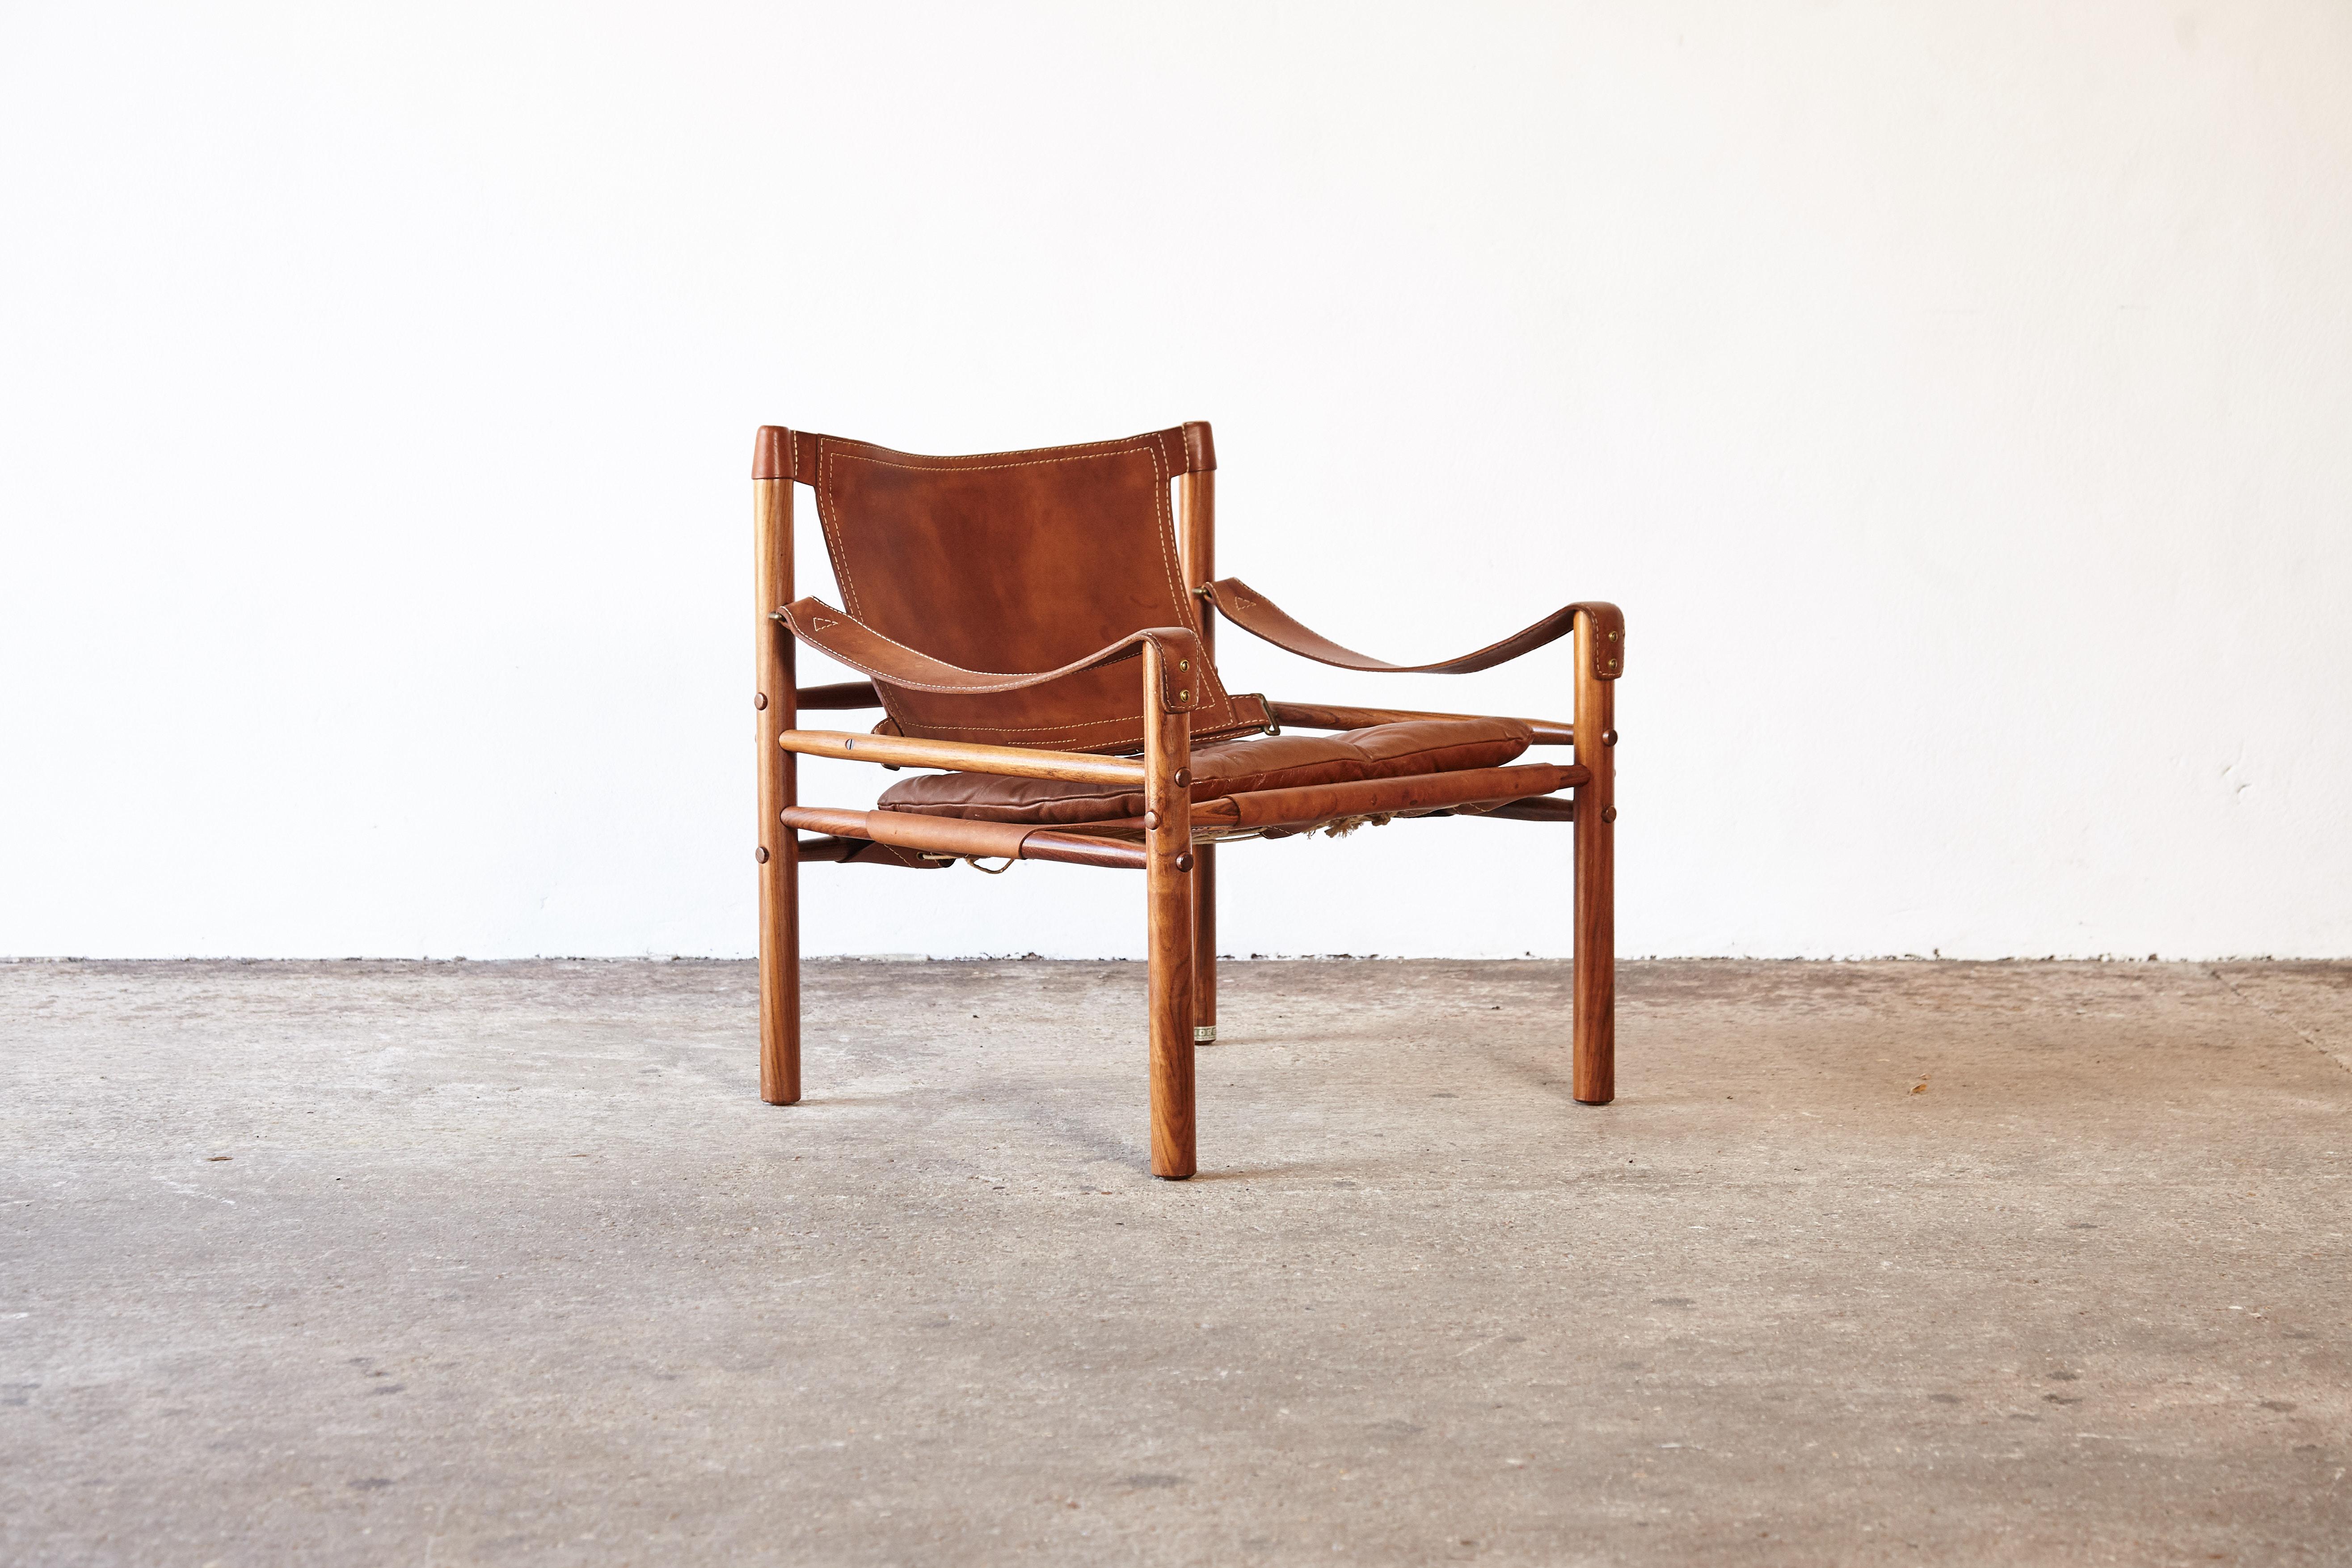 A superb Arne Norell safari sirocco chair of rosewood and patinated brown leather. Made by Norell Mobler in Sweden, 1970s. Fast and inexpensive shipping worldwide.

The chair will be disassembled for shipping but was designed to be taken apart and